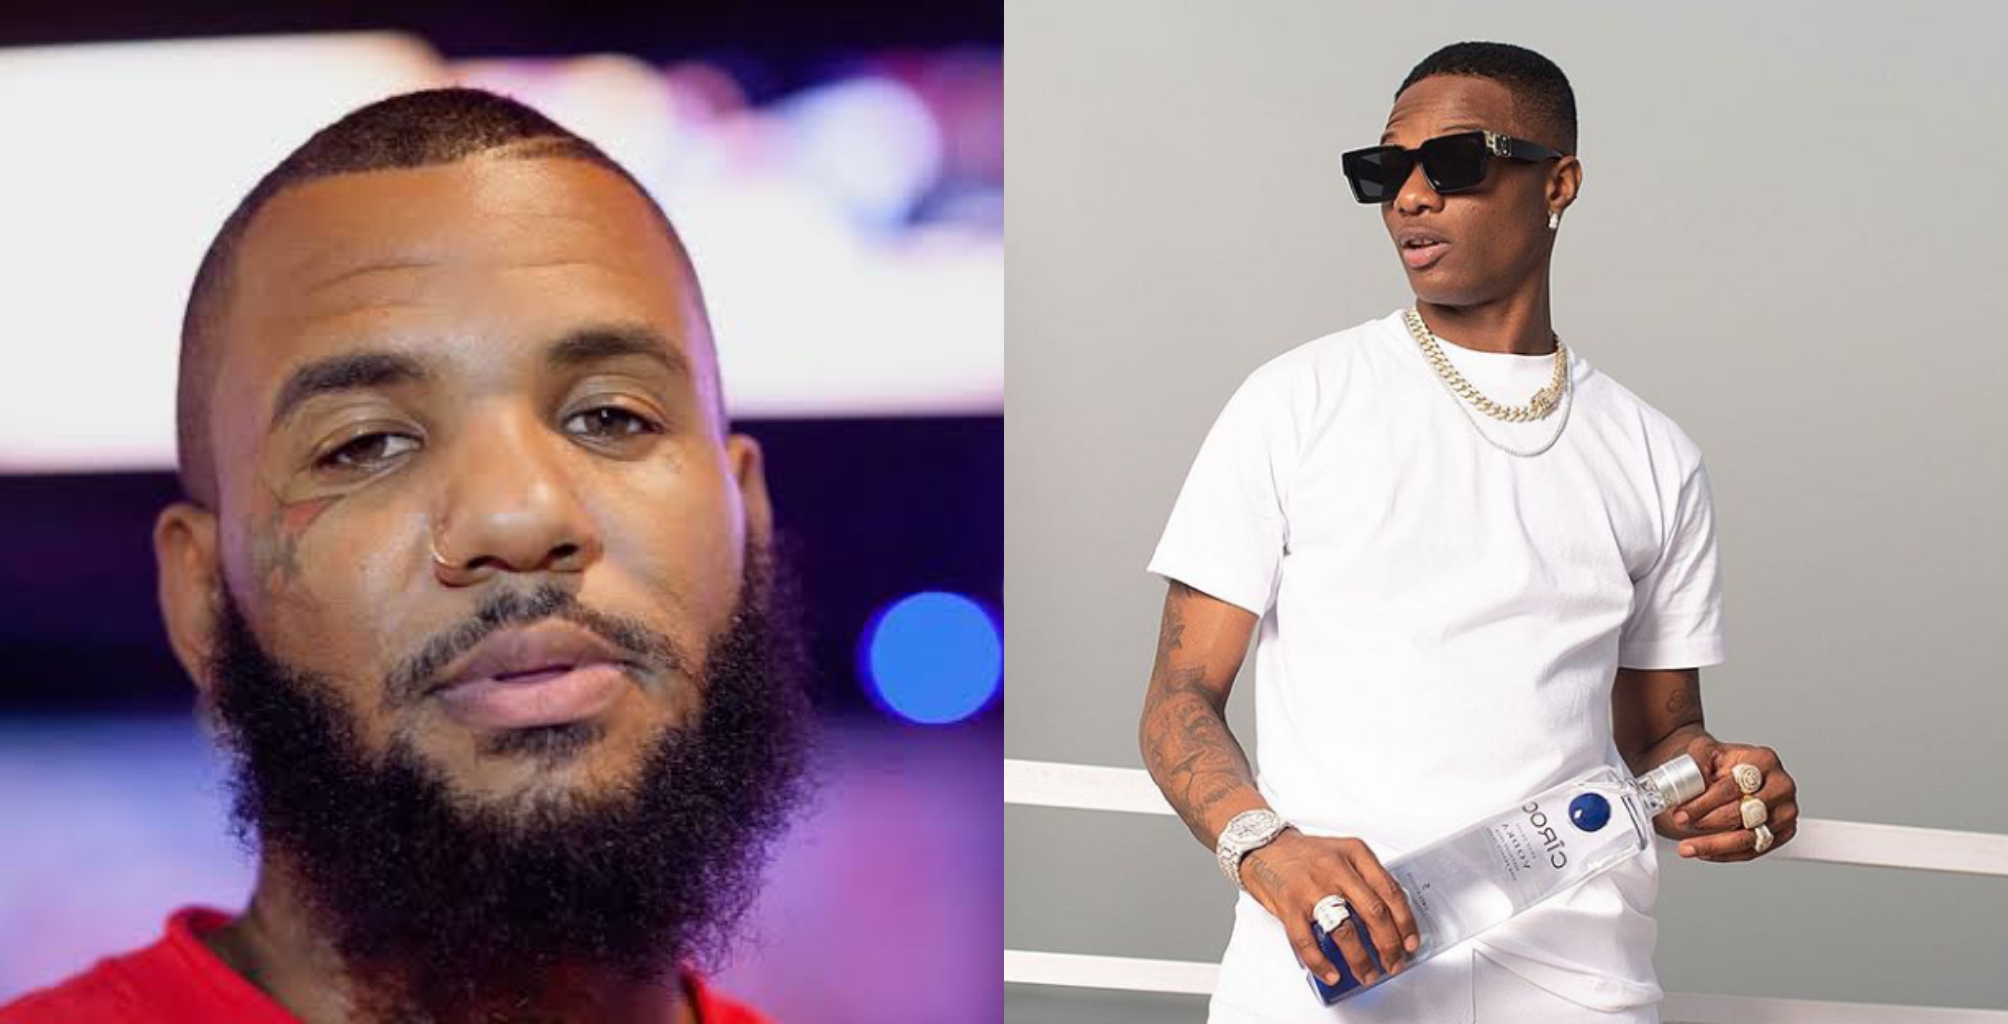 The Game says Wizkid is one of his favorite African artistes